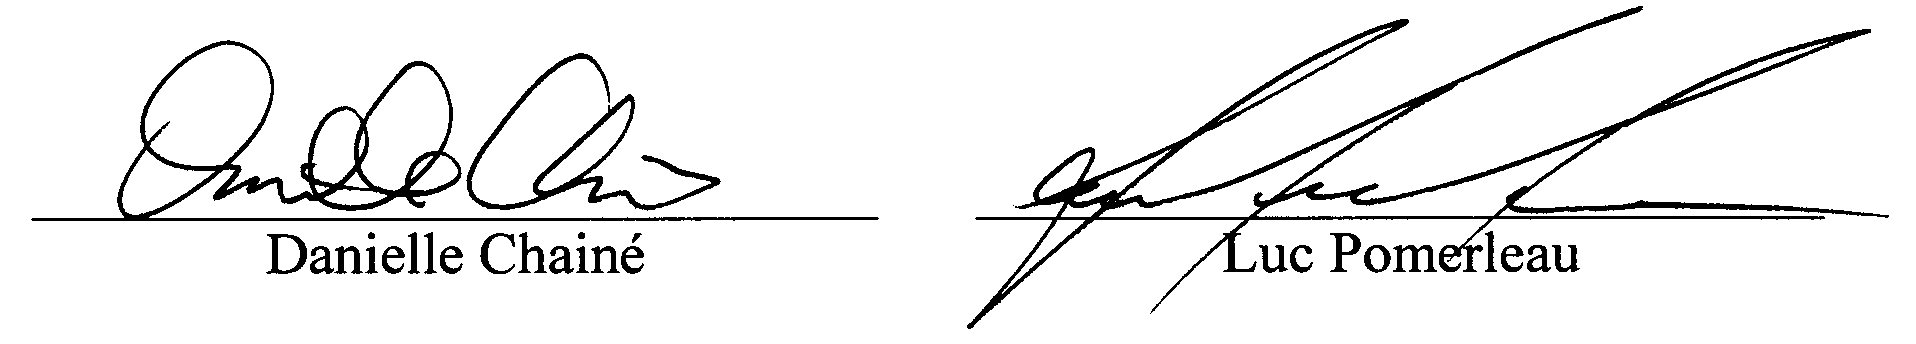 Signature Page - MOU - TR Agreement